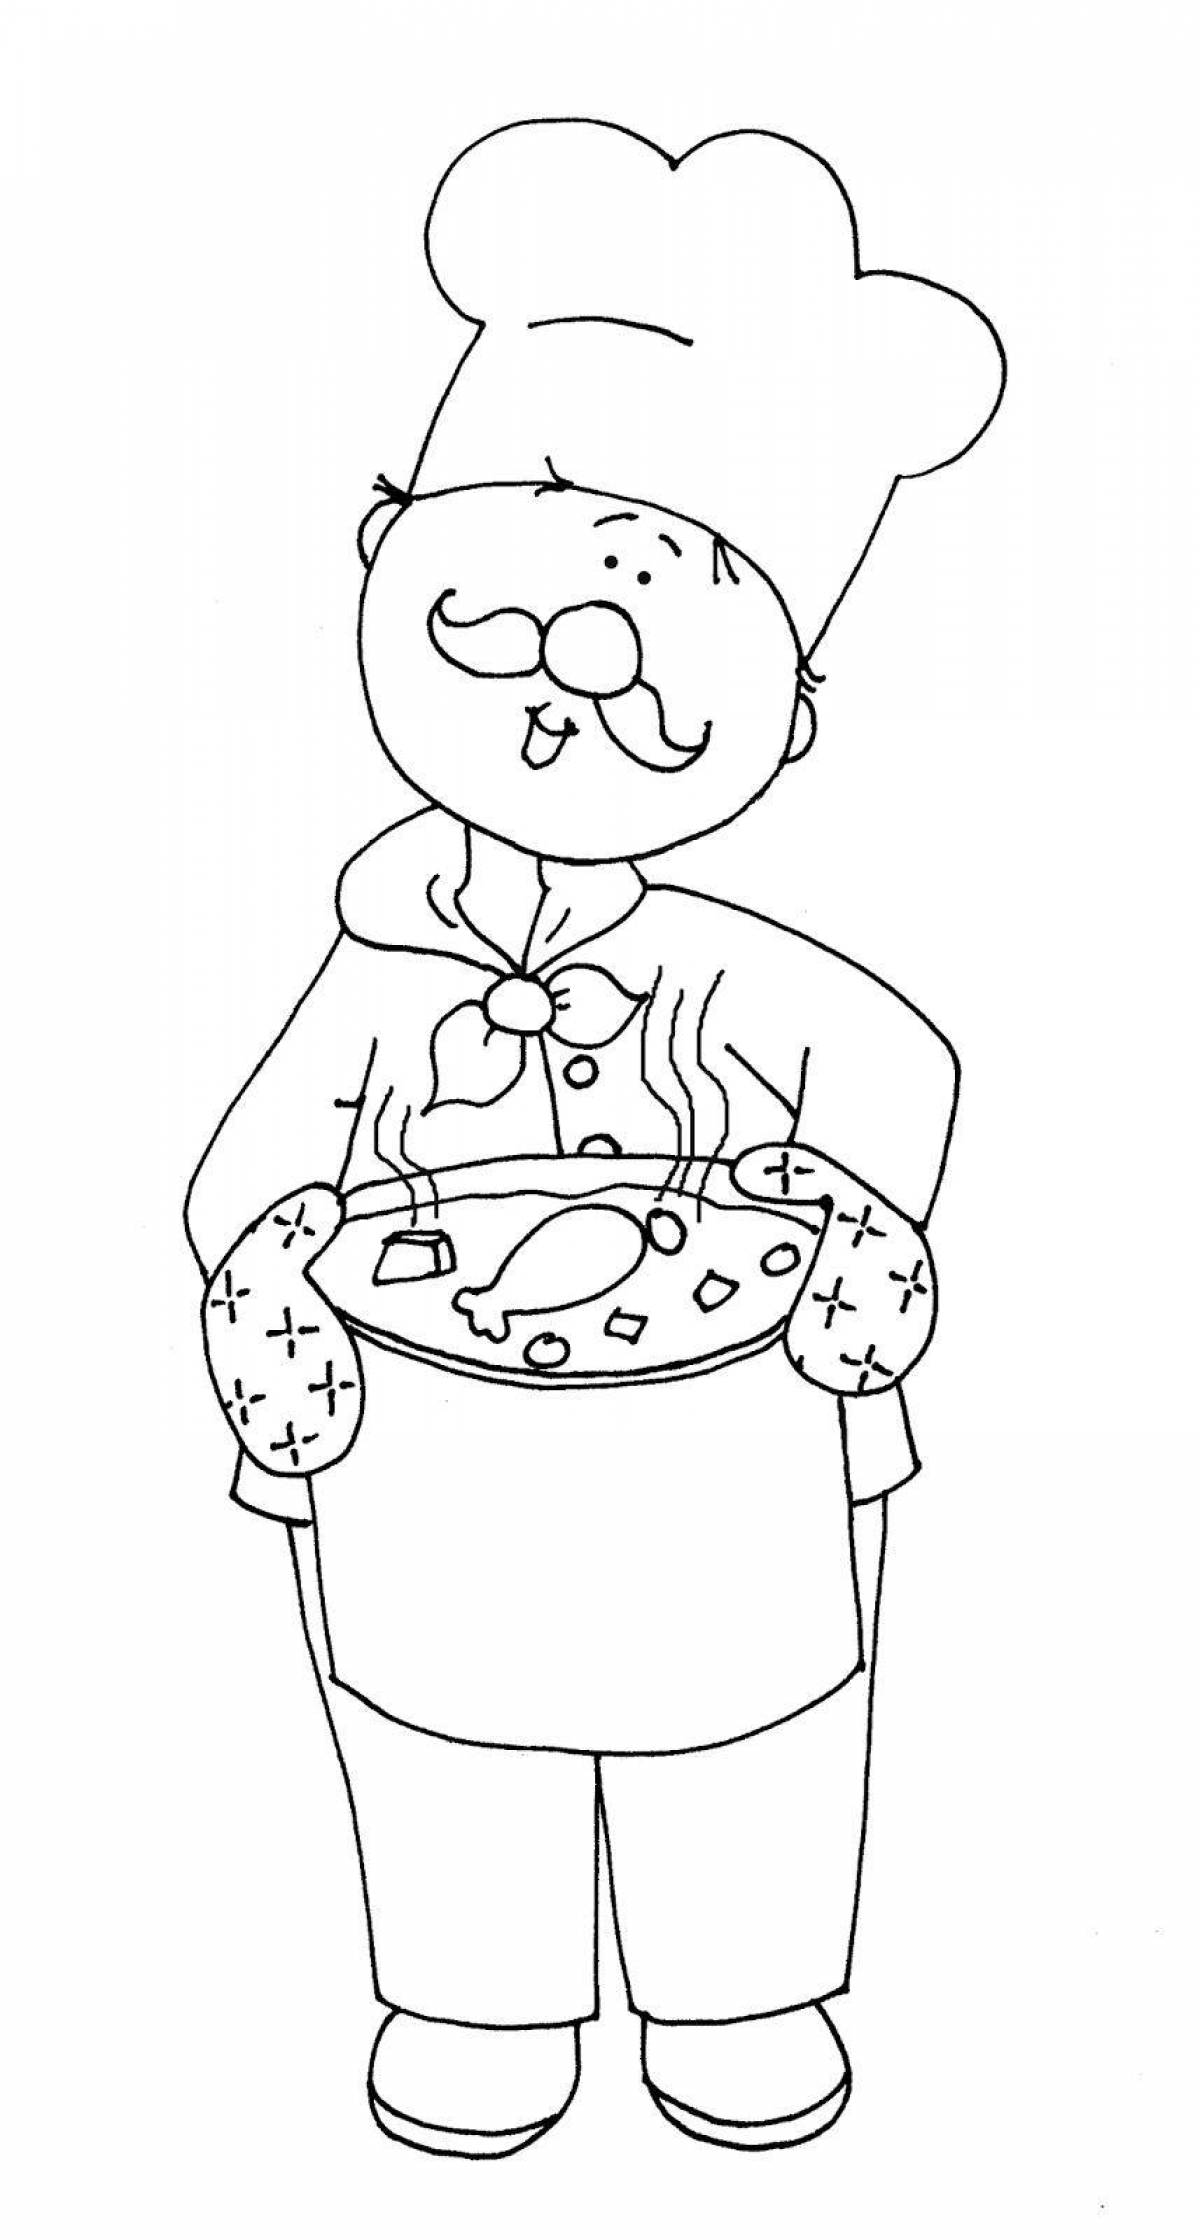 Color-explosion cook coloring page for children 6-7 years old